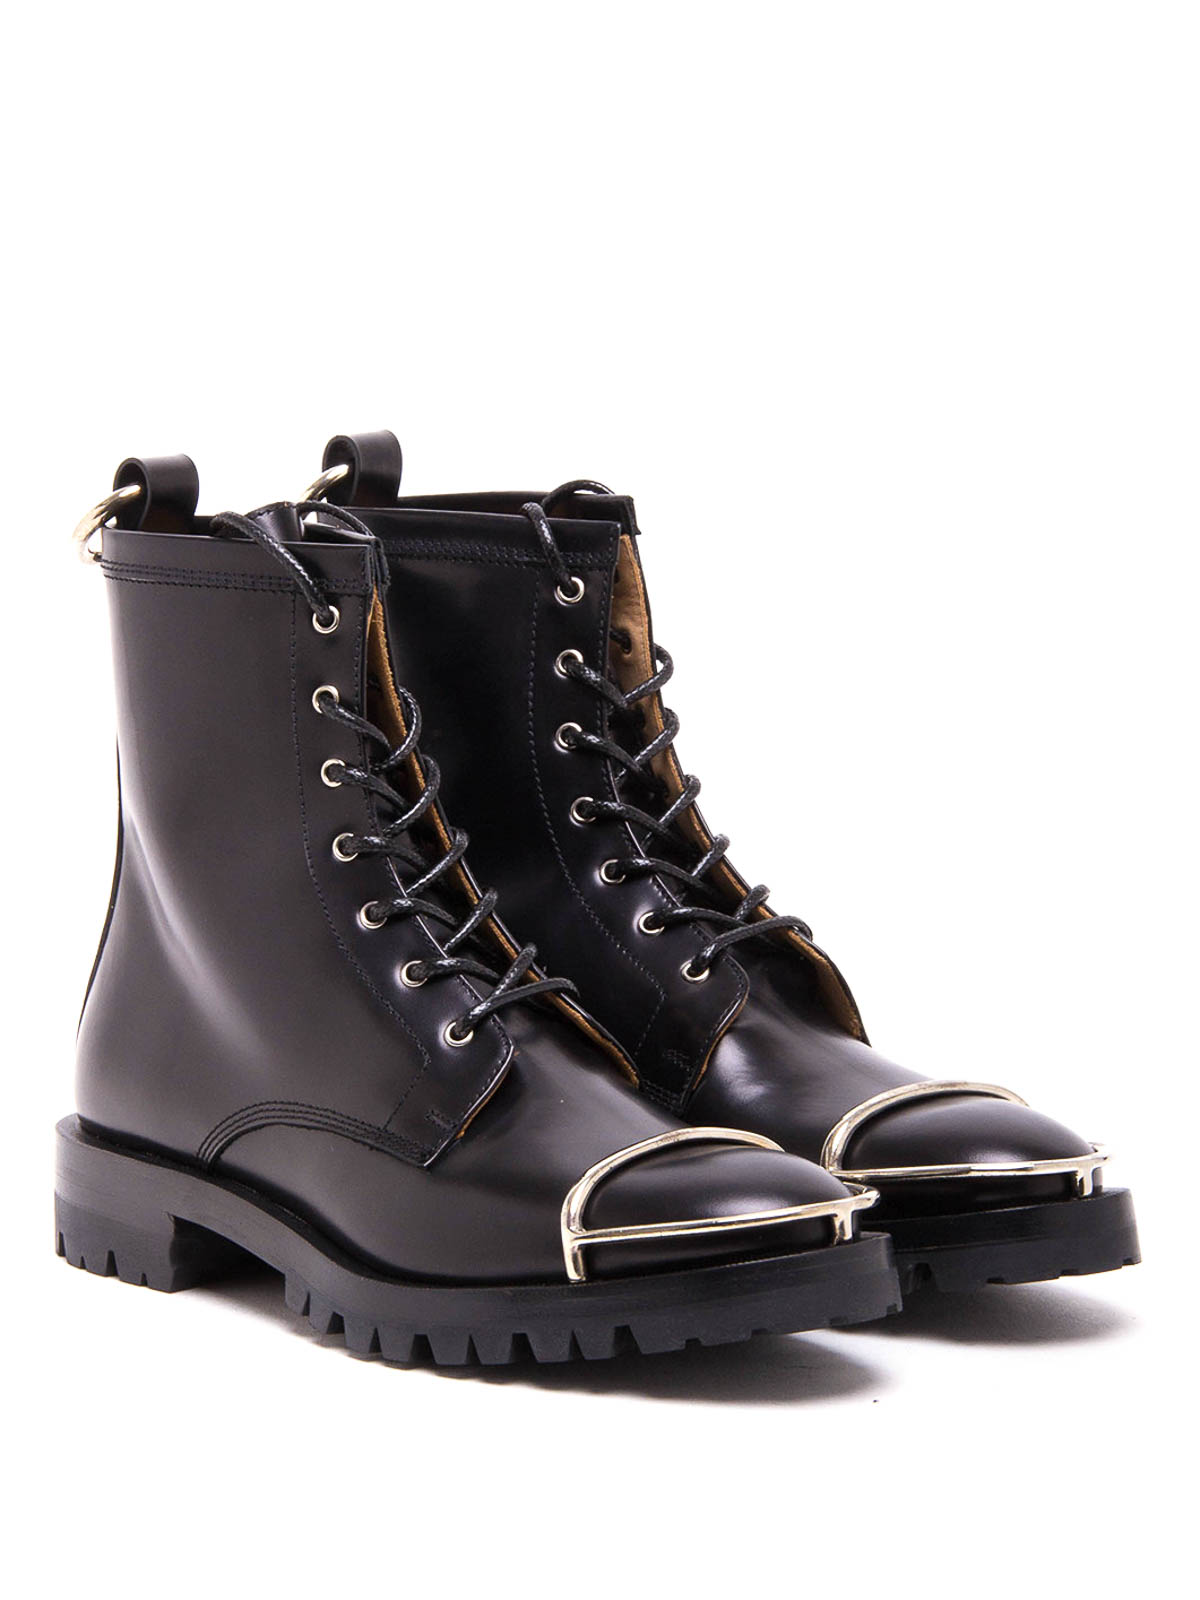 alexander wang lace up boots